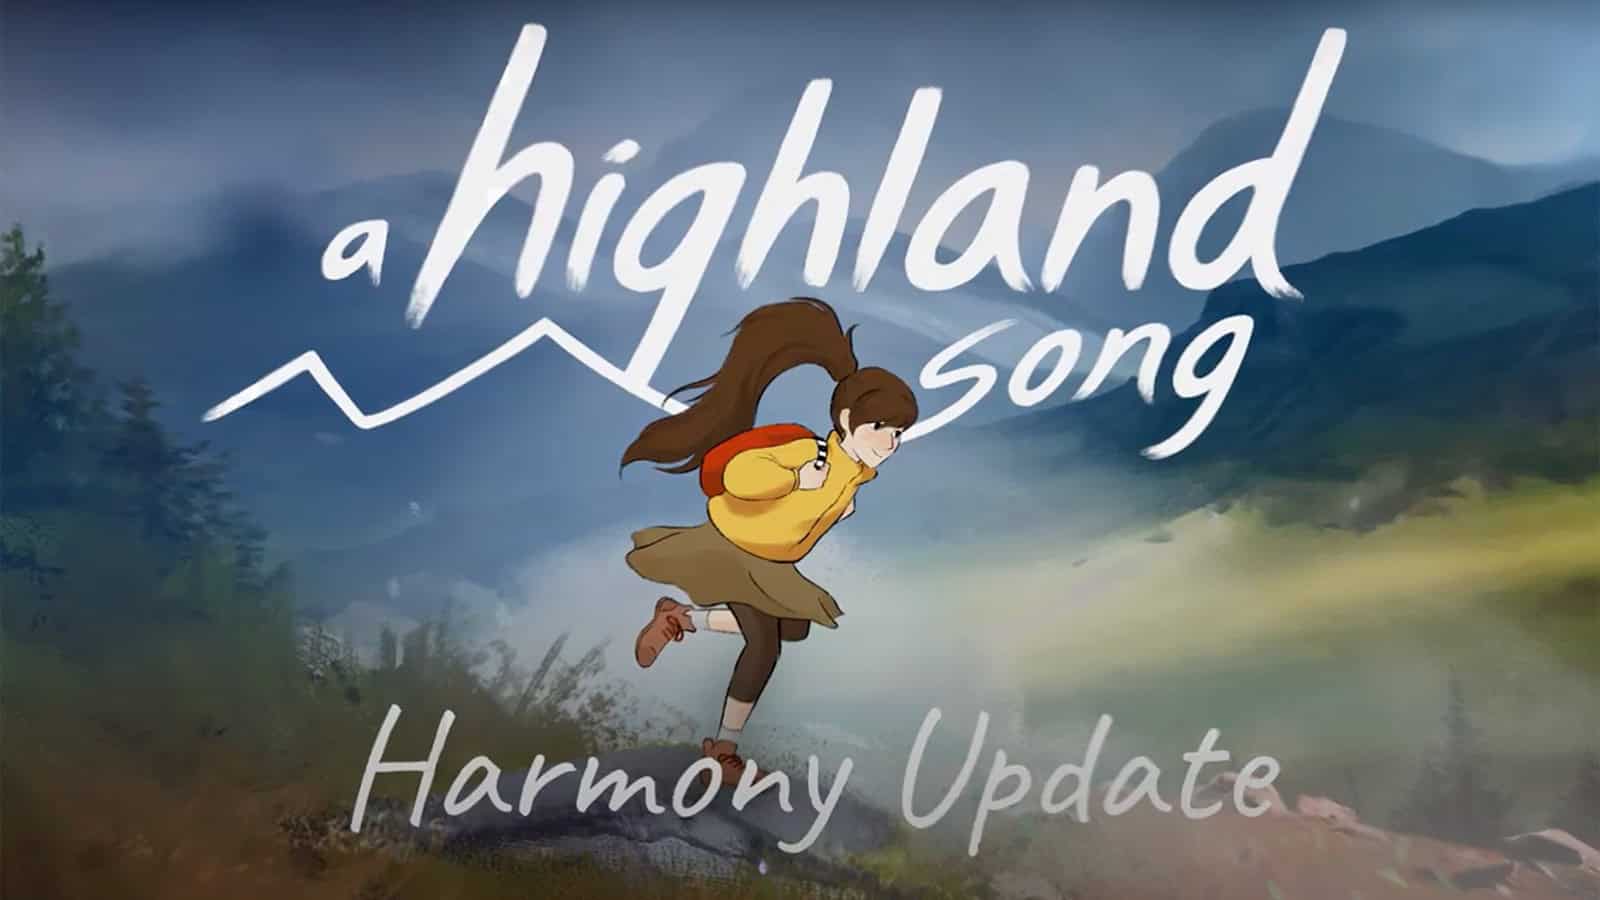 The primary artwork for inkle Studio's A Highland Song and its Harmony update